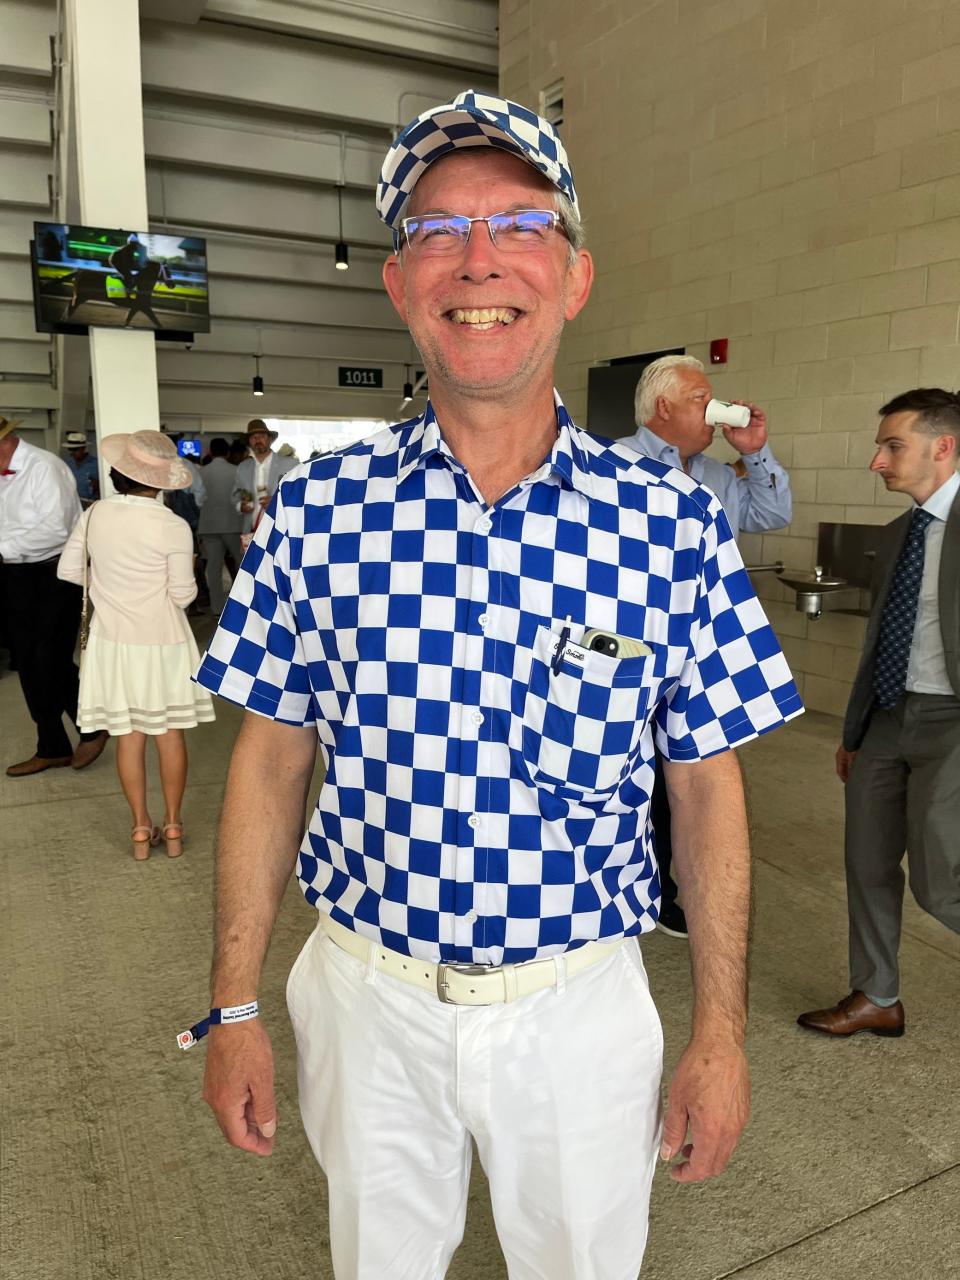 Jeff Duvilla of New Jersey shows off his Kentucky Derby attire.